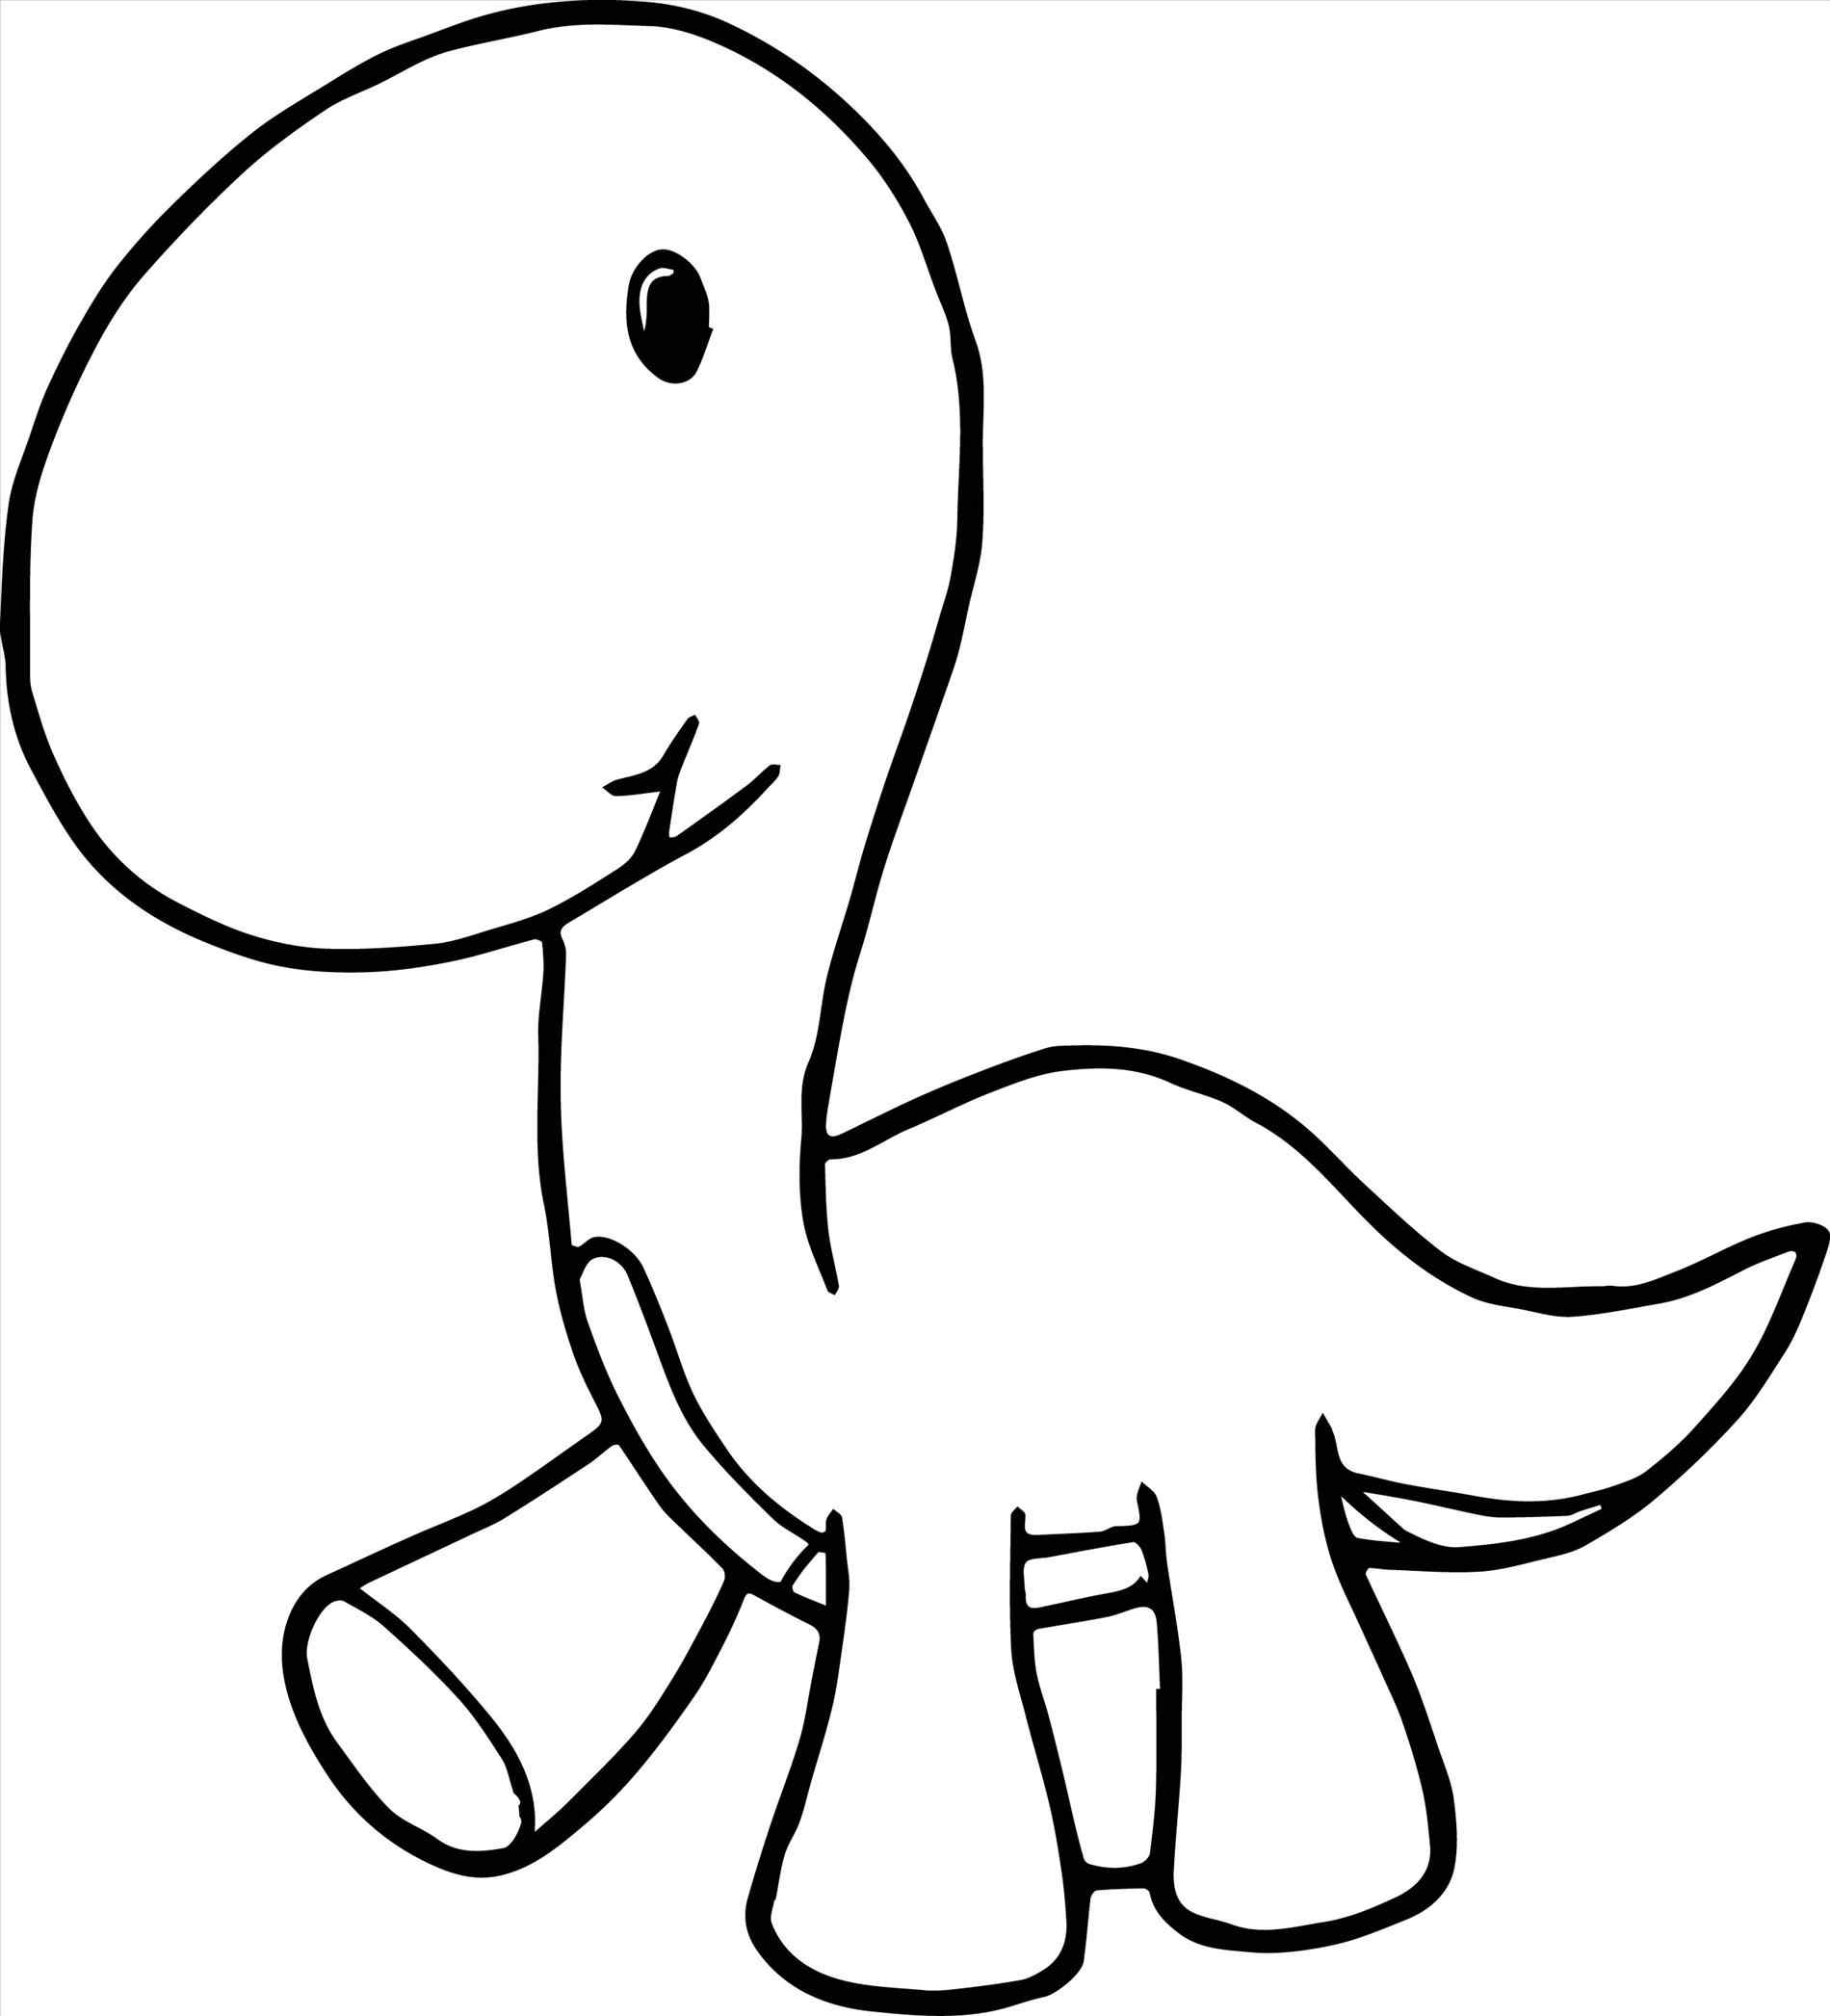 Baby Dinosaurs Cartoon   Free download on ClipArtMag